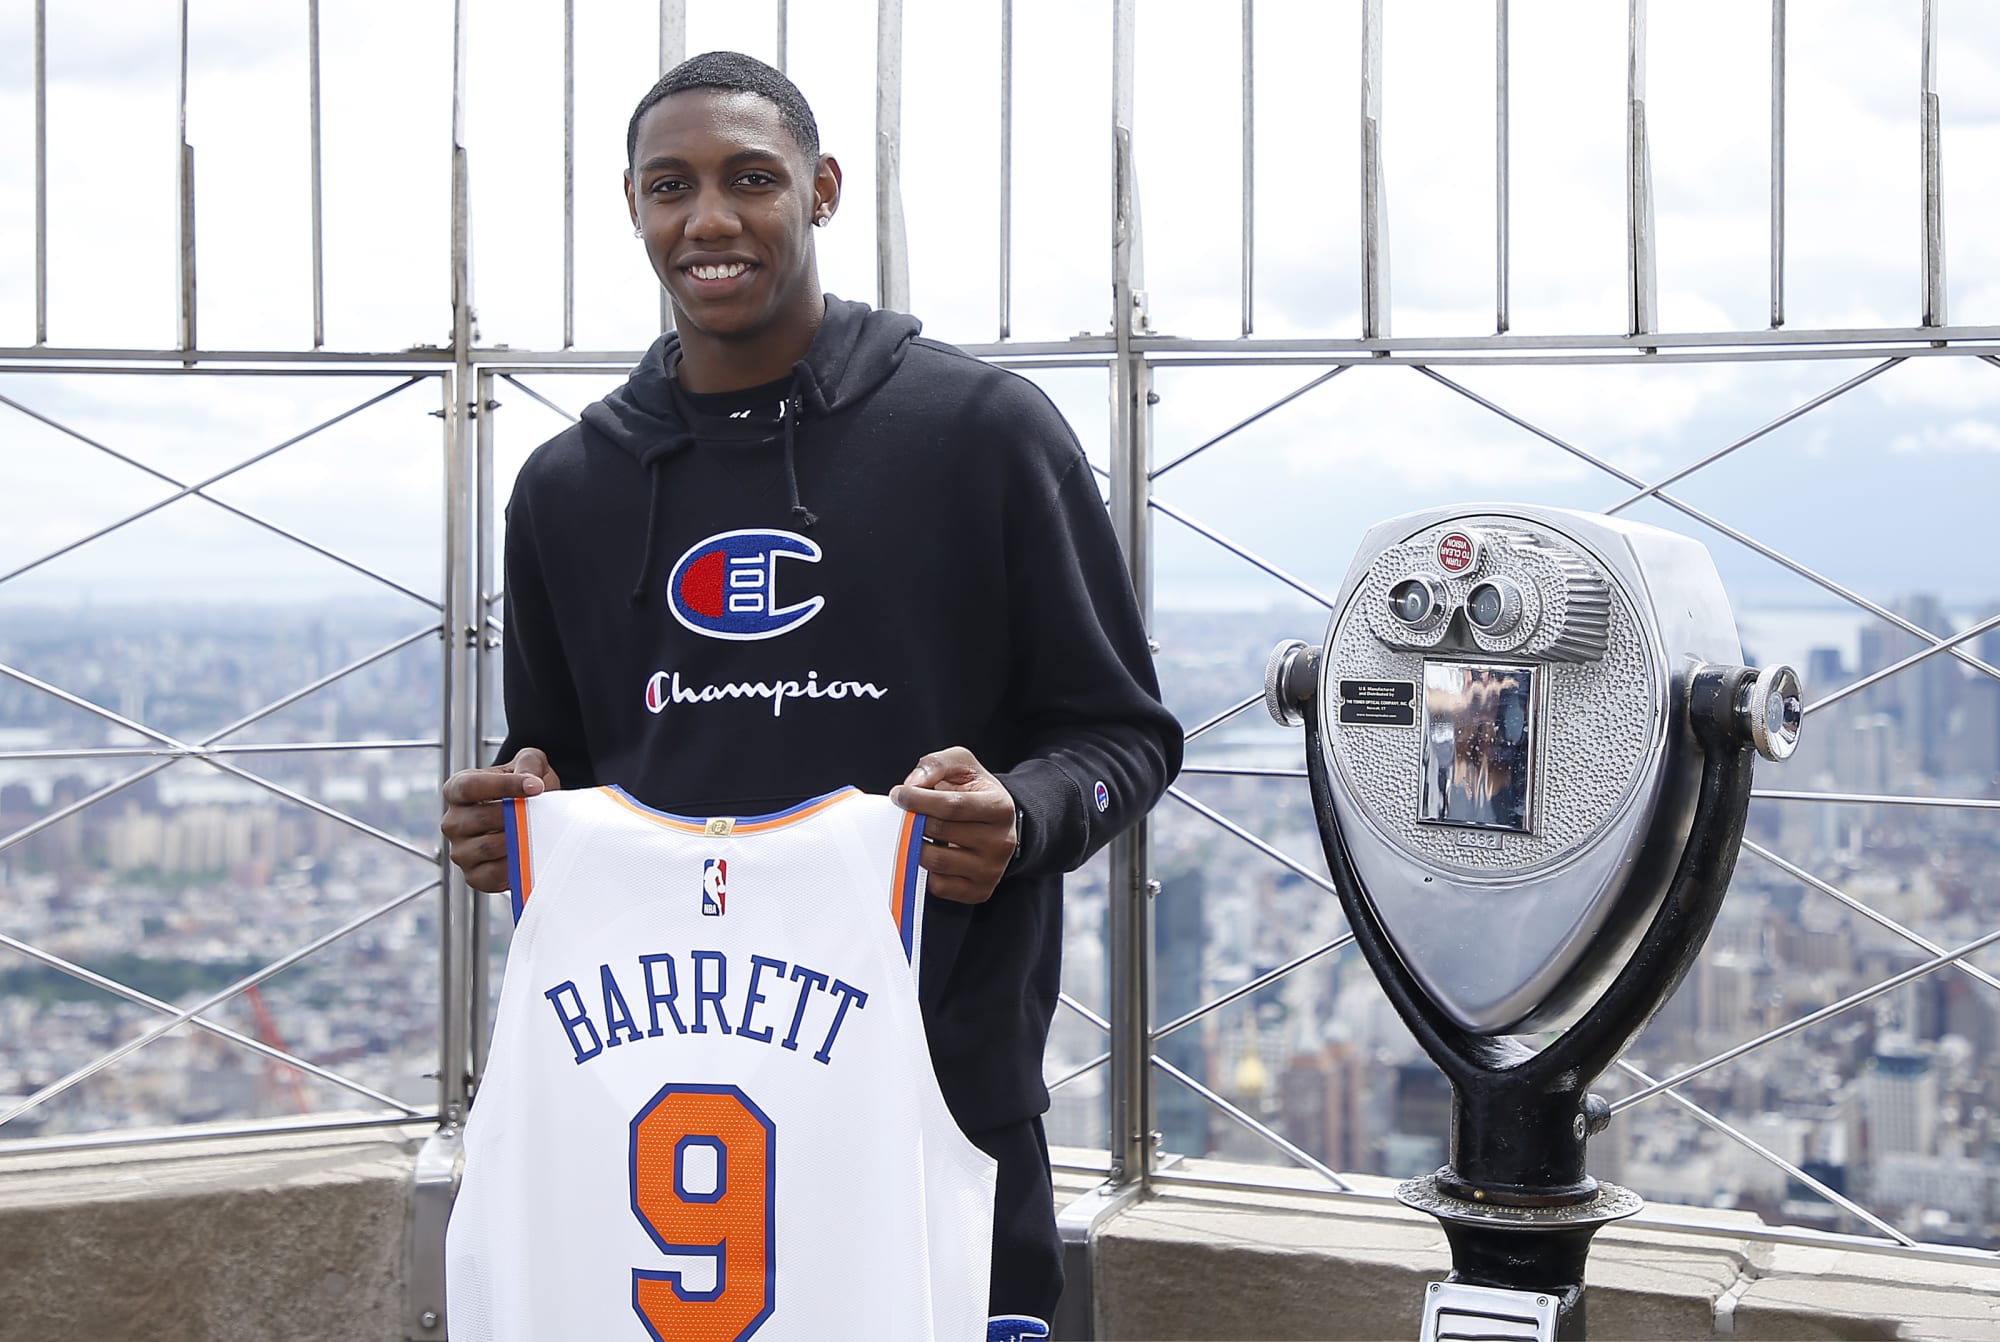 RJ Barrett for the 2020-2021 New York Knicks City Edition Uniform designed  by Kith. The Knicks will wear this uniform on Friday nights and…